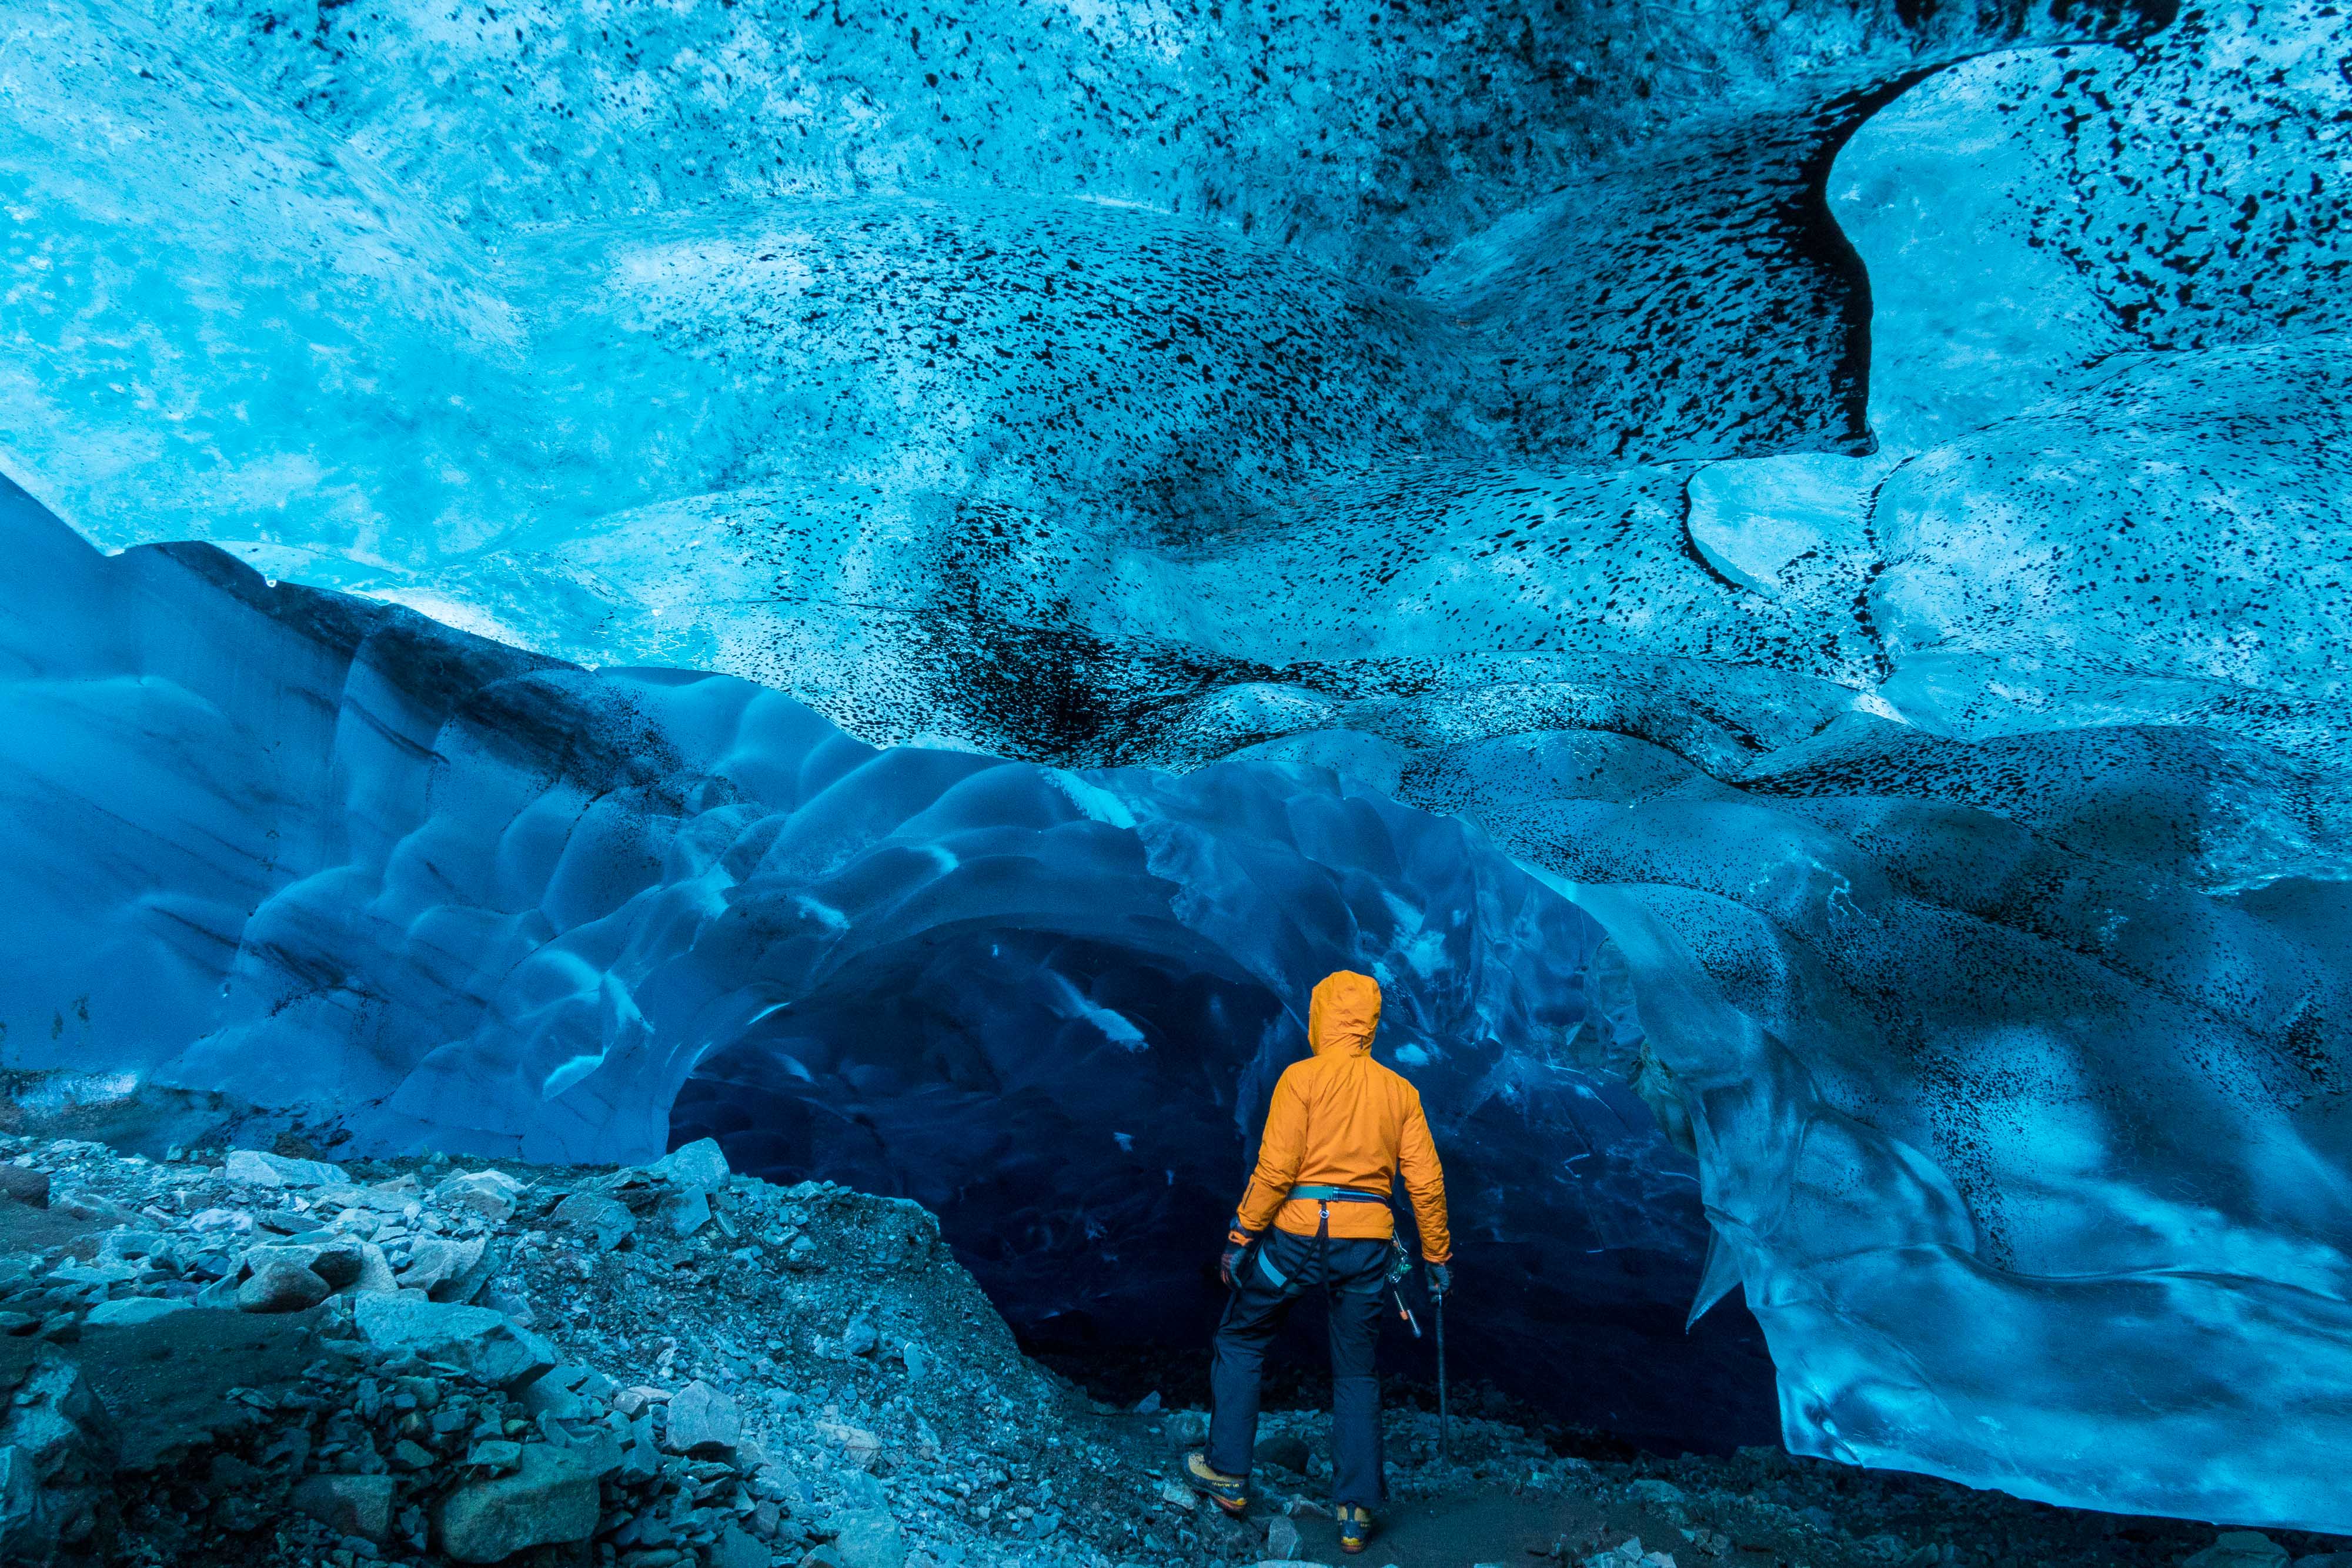 These pictures of the frozen world of the Vatnajökull Glacier were made possible through Sonys new sensor technology, allowing incredibly detailed low-light photography. Renowned local guides Einar Runar Sigurdsson and Helen Maria explored the frozen world of the Vatnajökull Glacier in Iceland using Sonys latest digital cameras, the RX10 II and RX100 IV, which feature the worlds first 1.0 type stacked Exmor RS CMOS sensor. This picture: Einar Runar Sigurdsson takes a self portrait using the time function in the ABC cave For further information please contact Rochelle Collison at Hope & Glory PR on 020 7014 5306 or at rochelle.collison@hopeandglorypr.com Copyright: © Einar Runar Sigurdsson / Sony